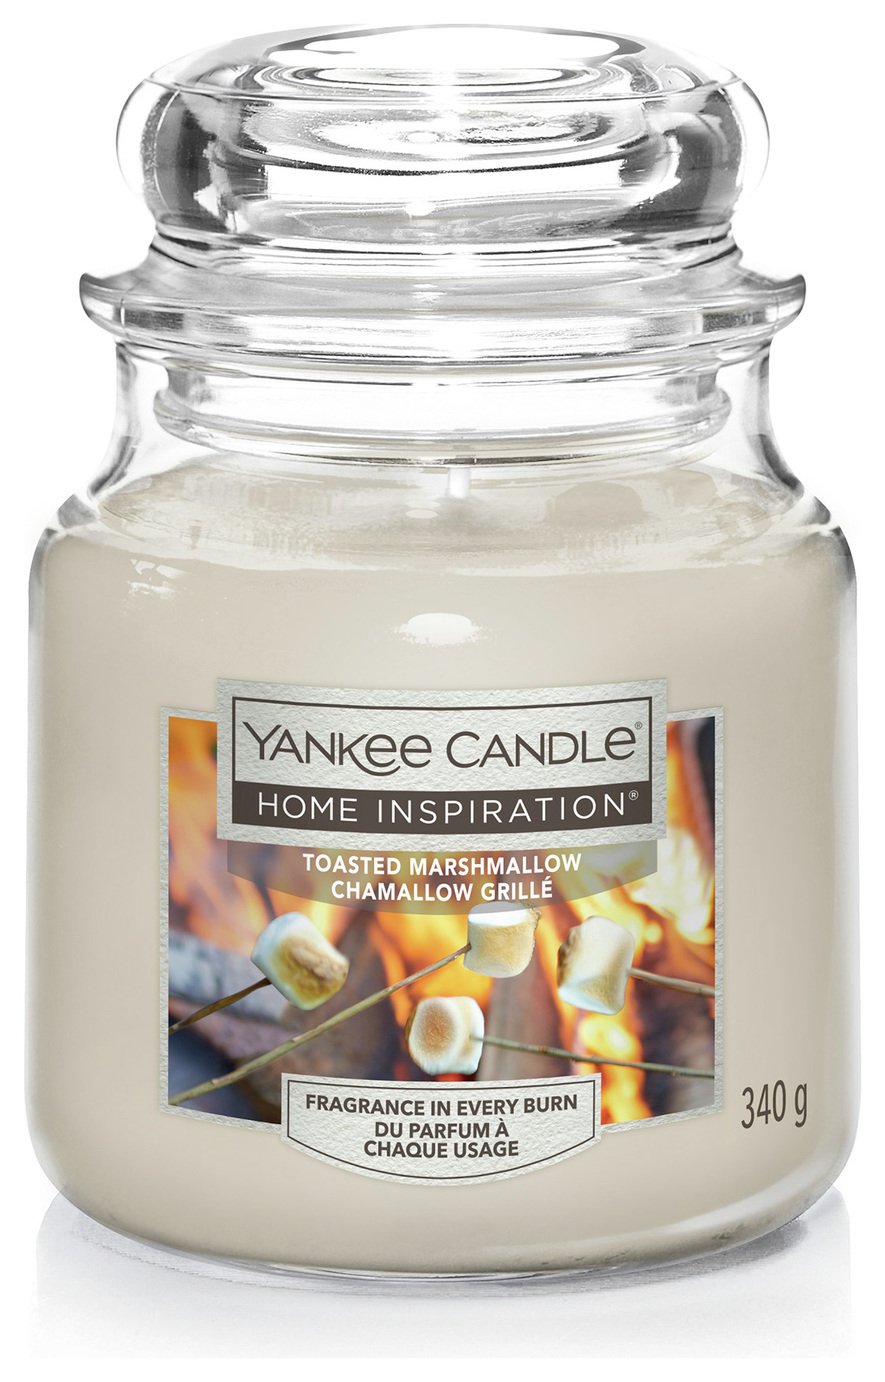  Yankee Home Inspiration Jar Candle - Toasted Marshmallow